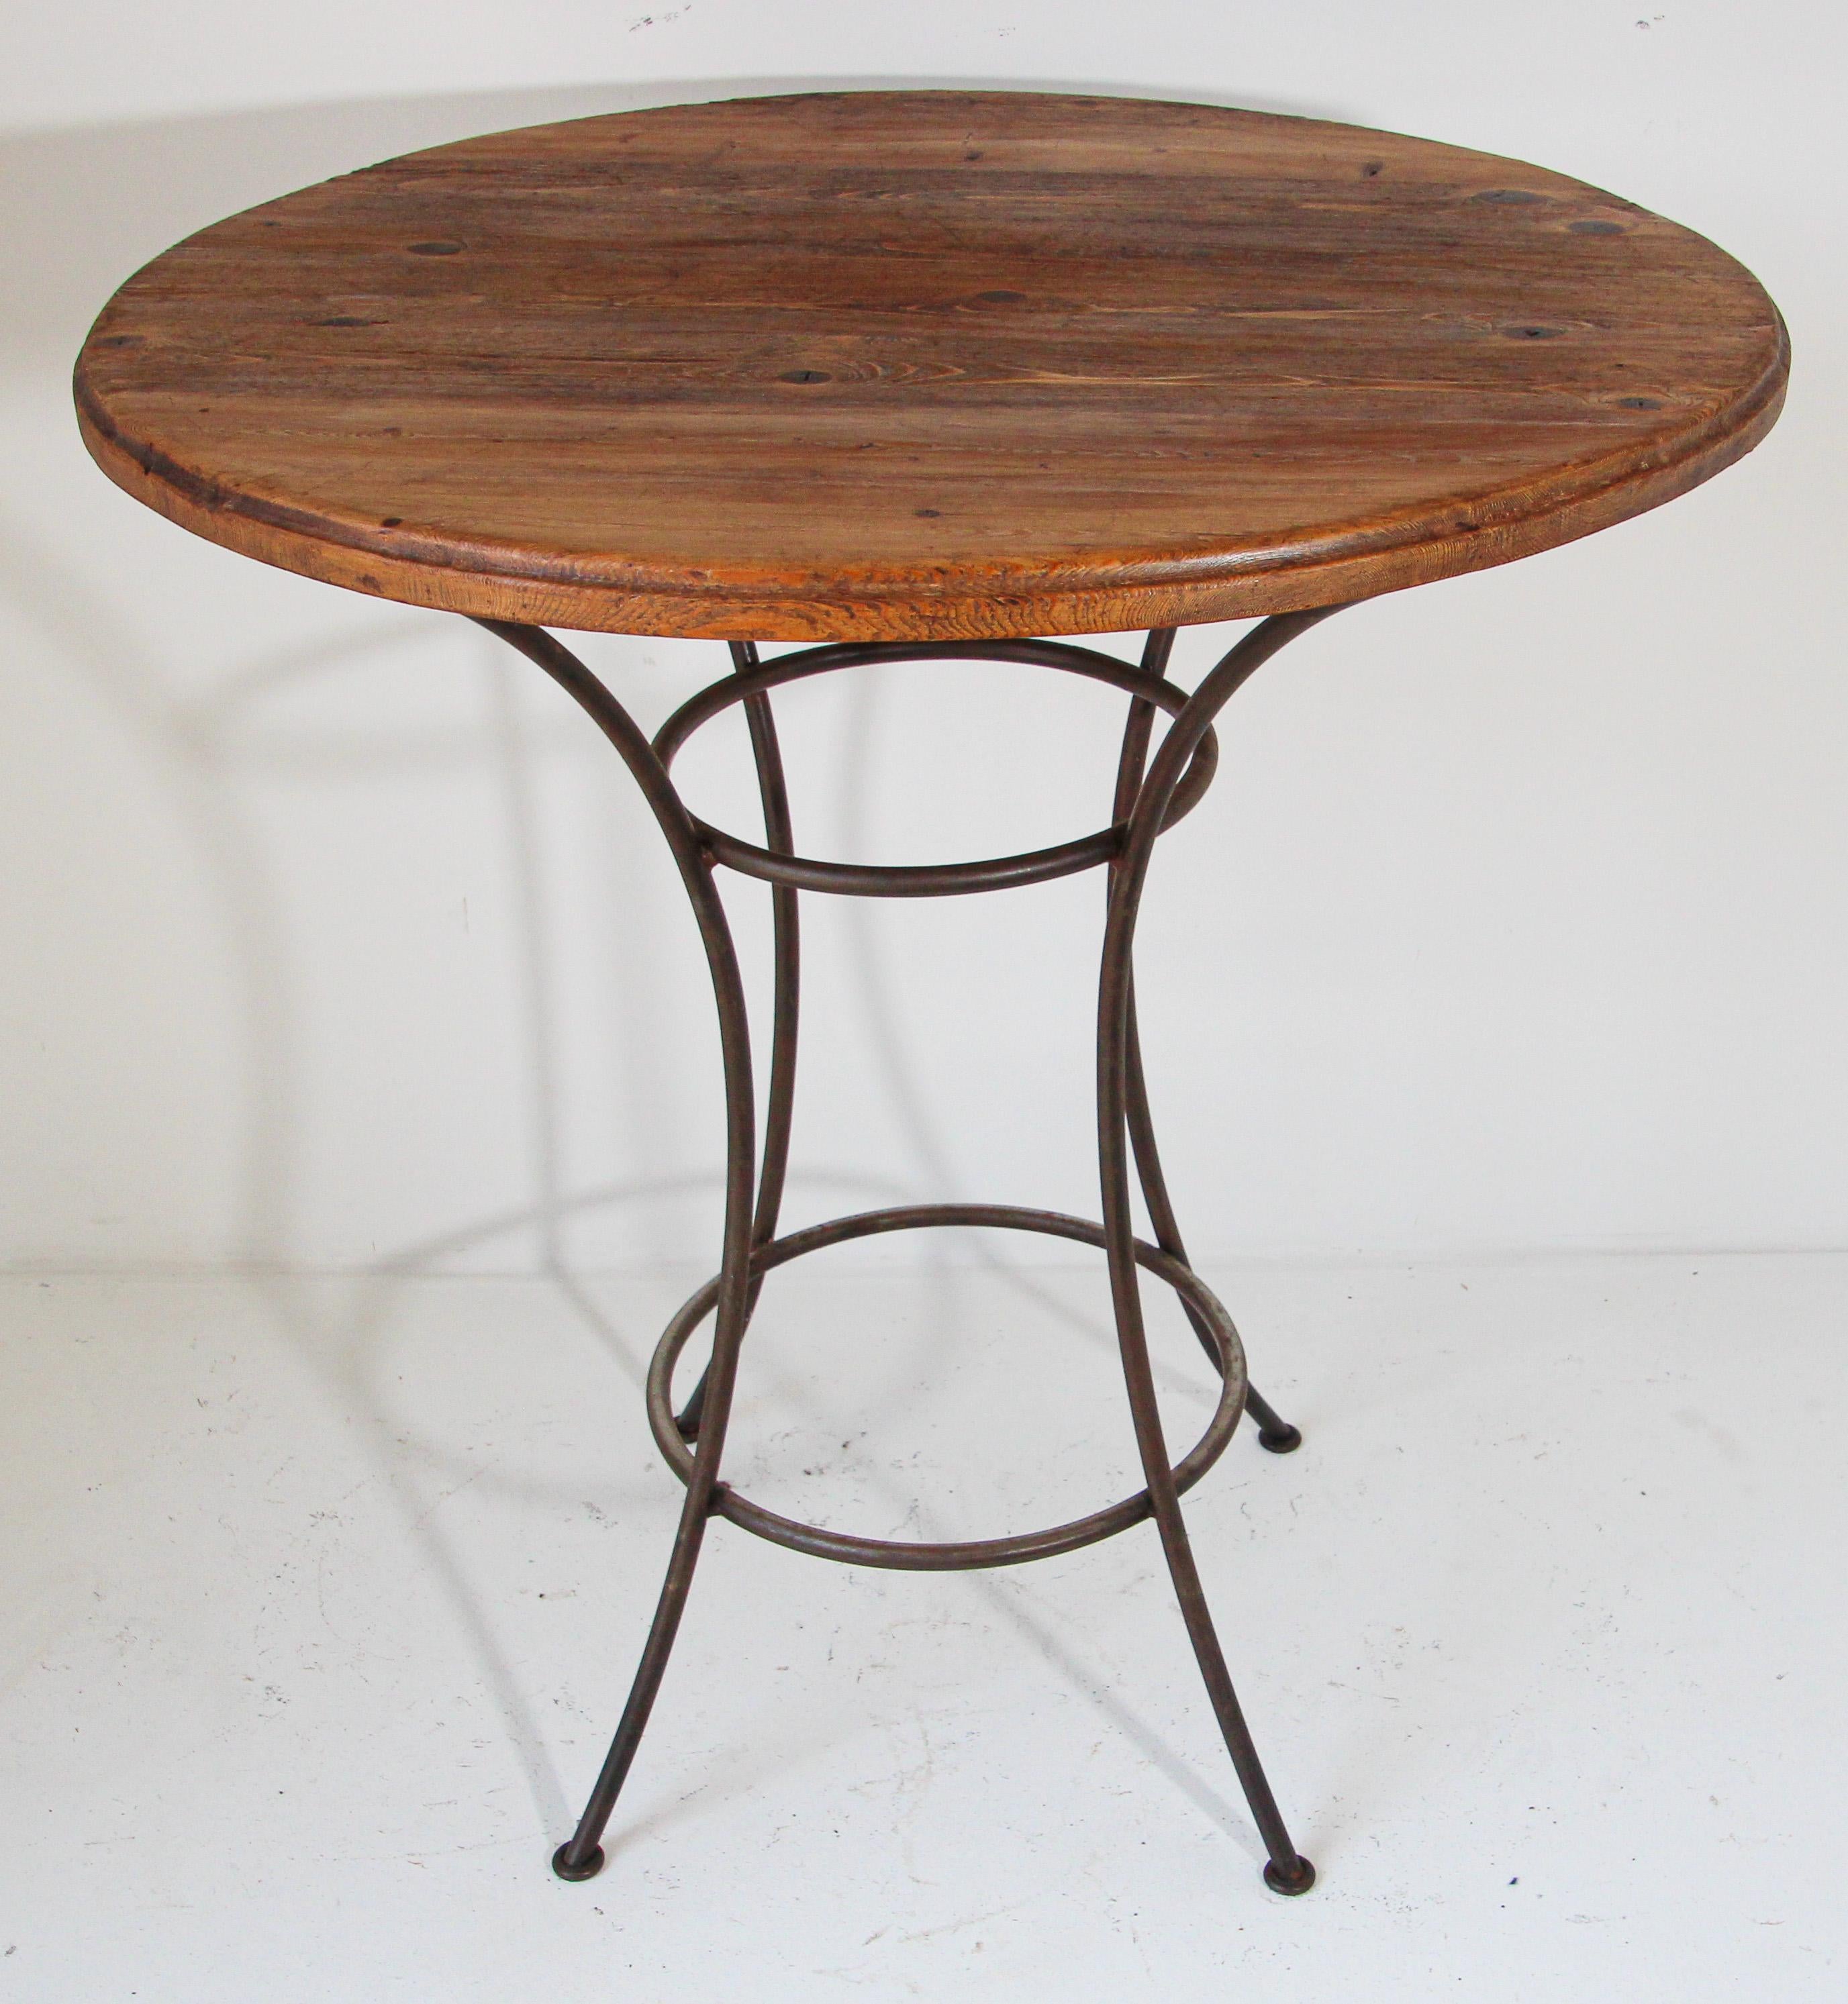 Handcrafted custom bar height table with wrought iron forged base and 39.5 inches diameter wood round top.
Spanish Revival bar table with beautiful wood round top and four curved simple legs. 
Dimensions:
Overall: Diameter 39.5